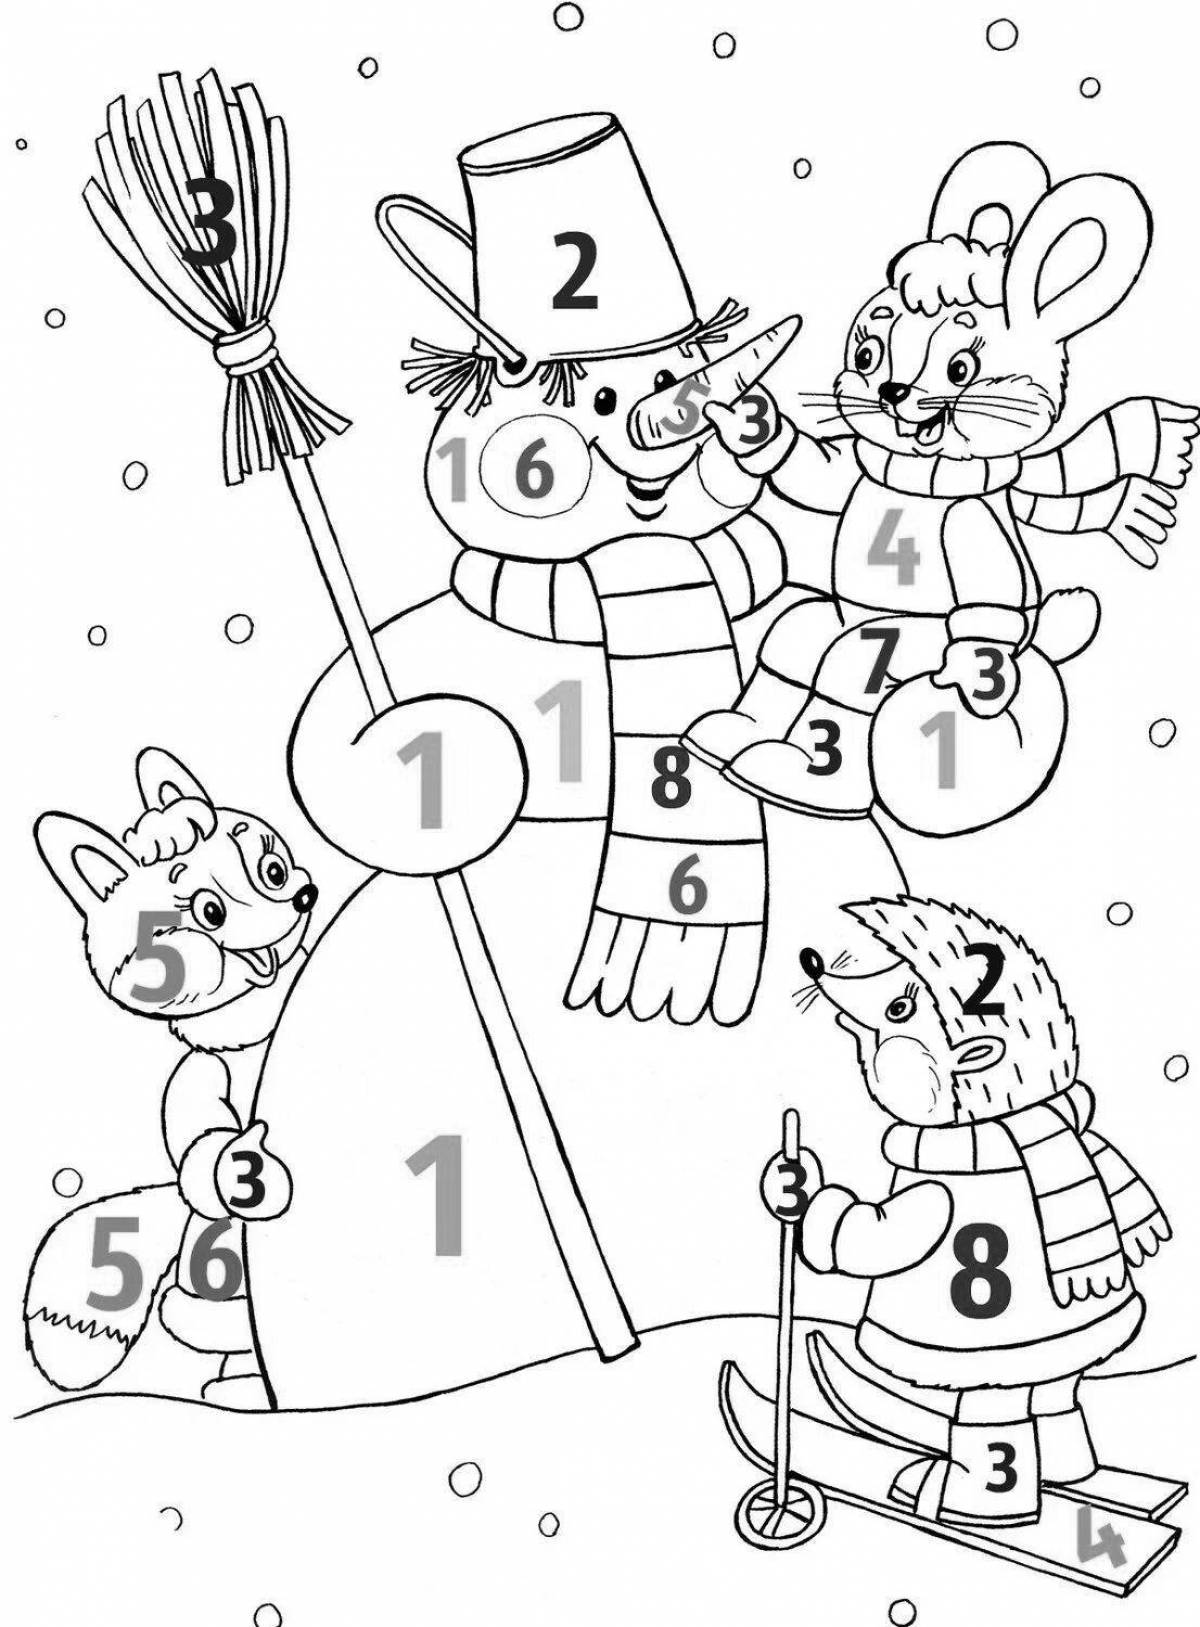 Snowman by numbers #3